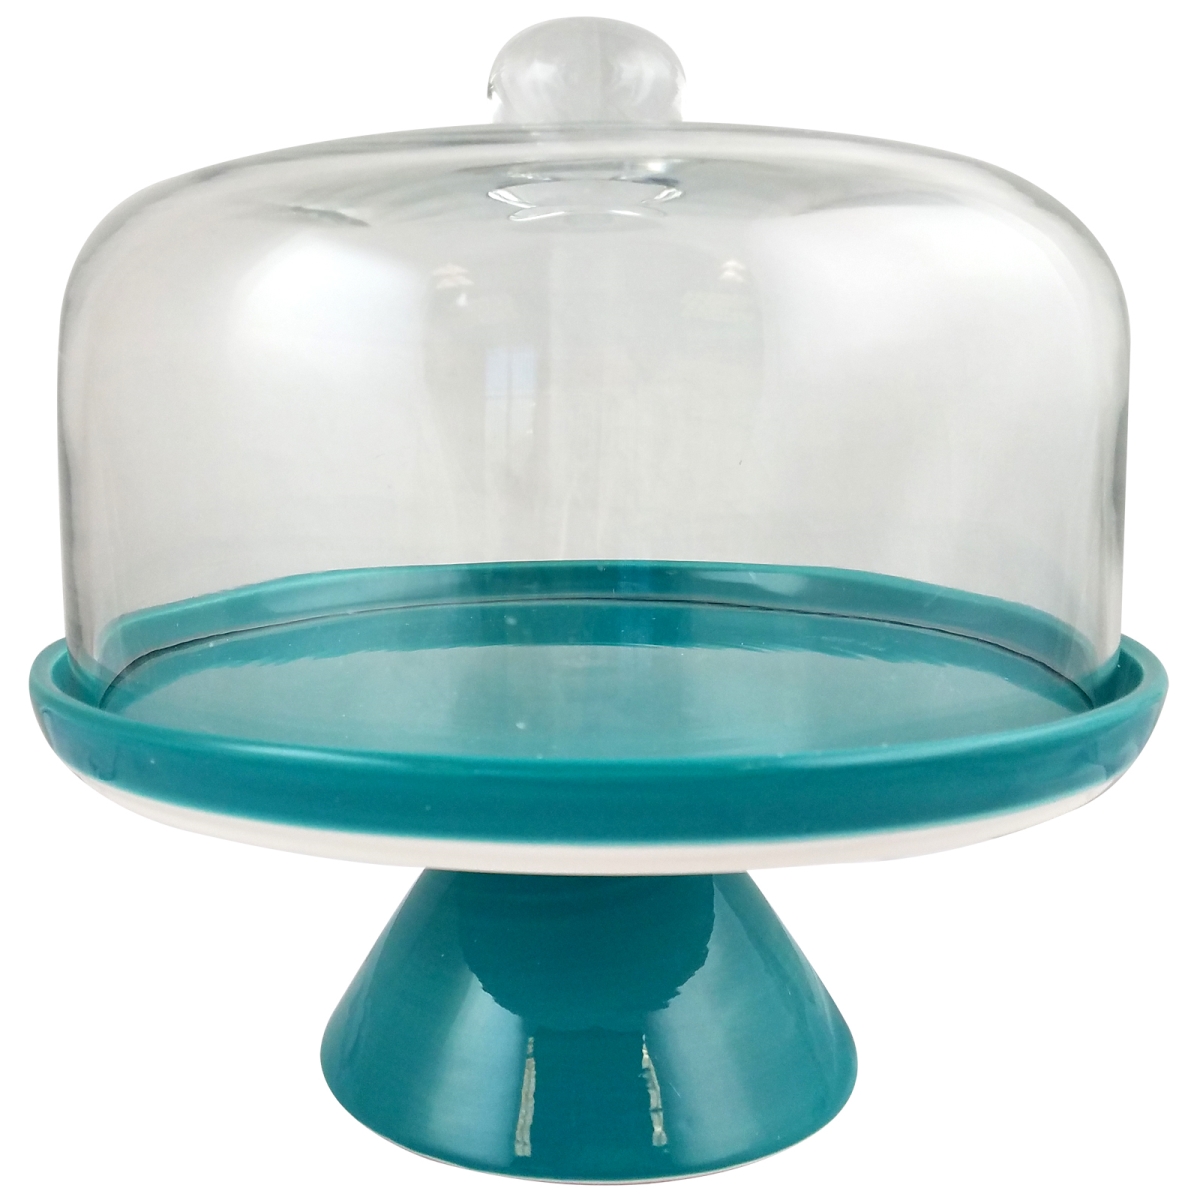 116808.02 Ceramic Nordic Cool Cake Stand With Glass Dome - Teal